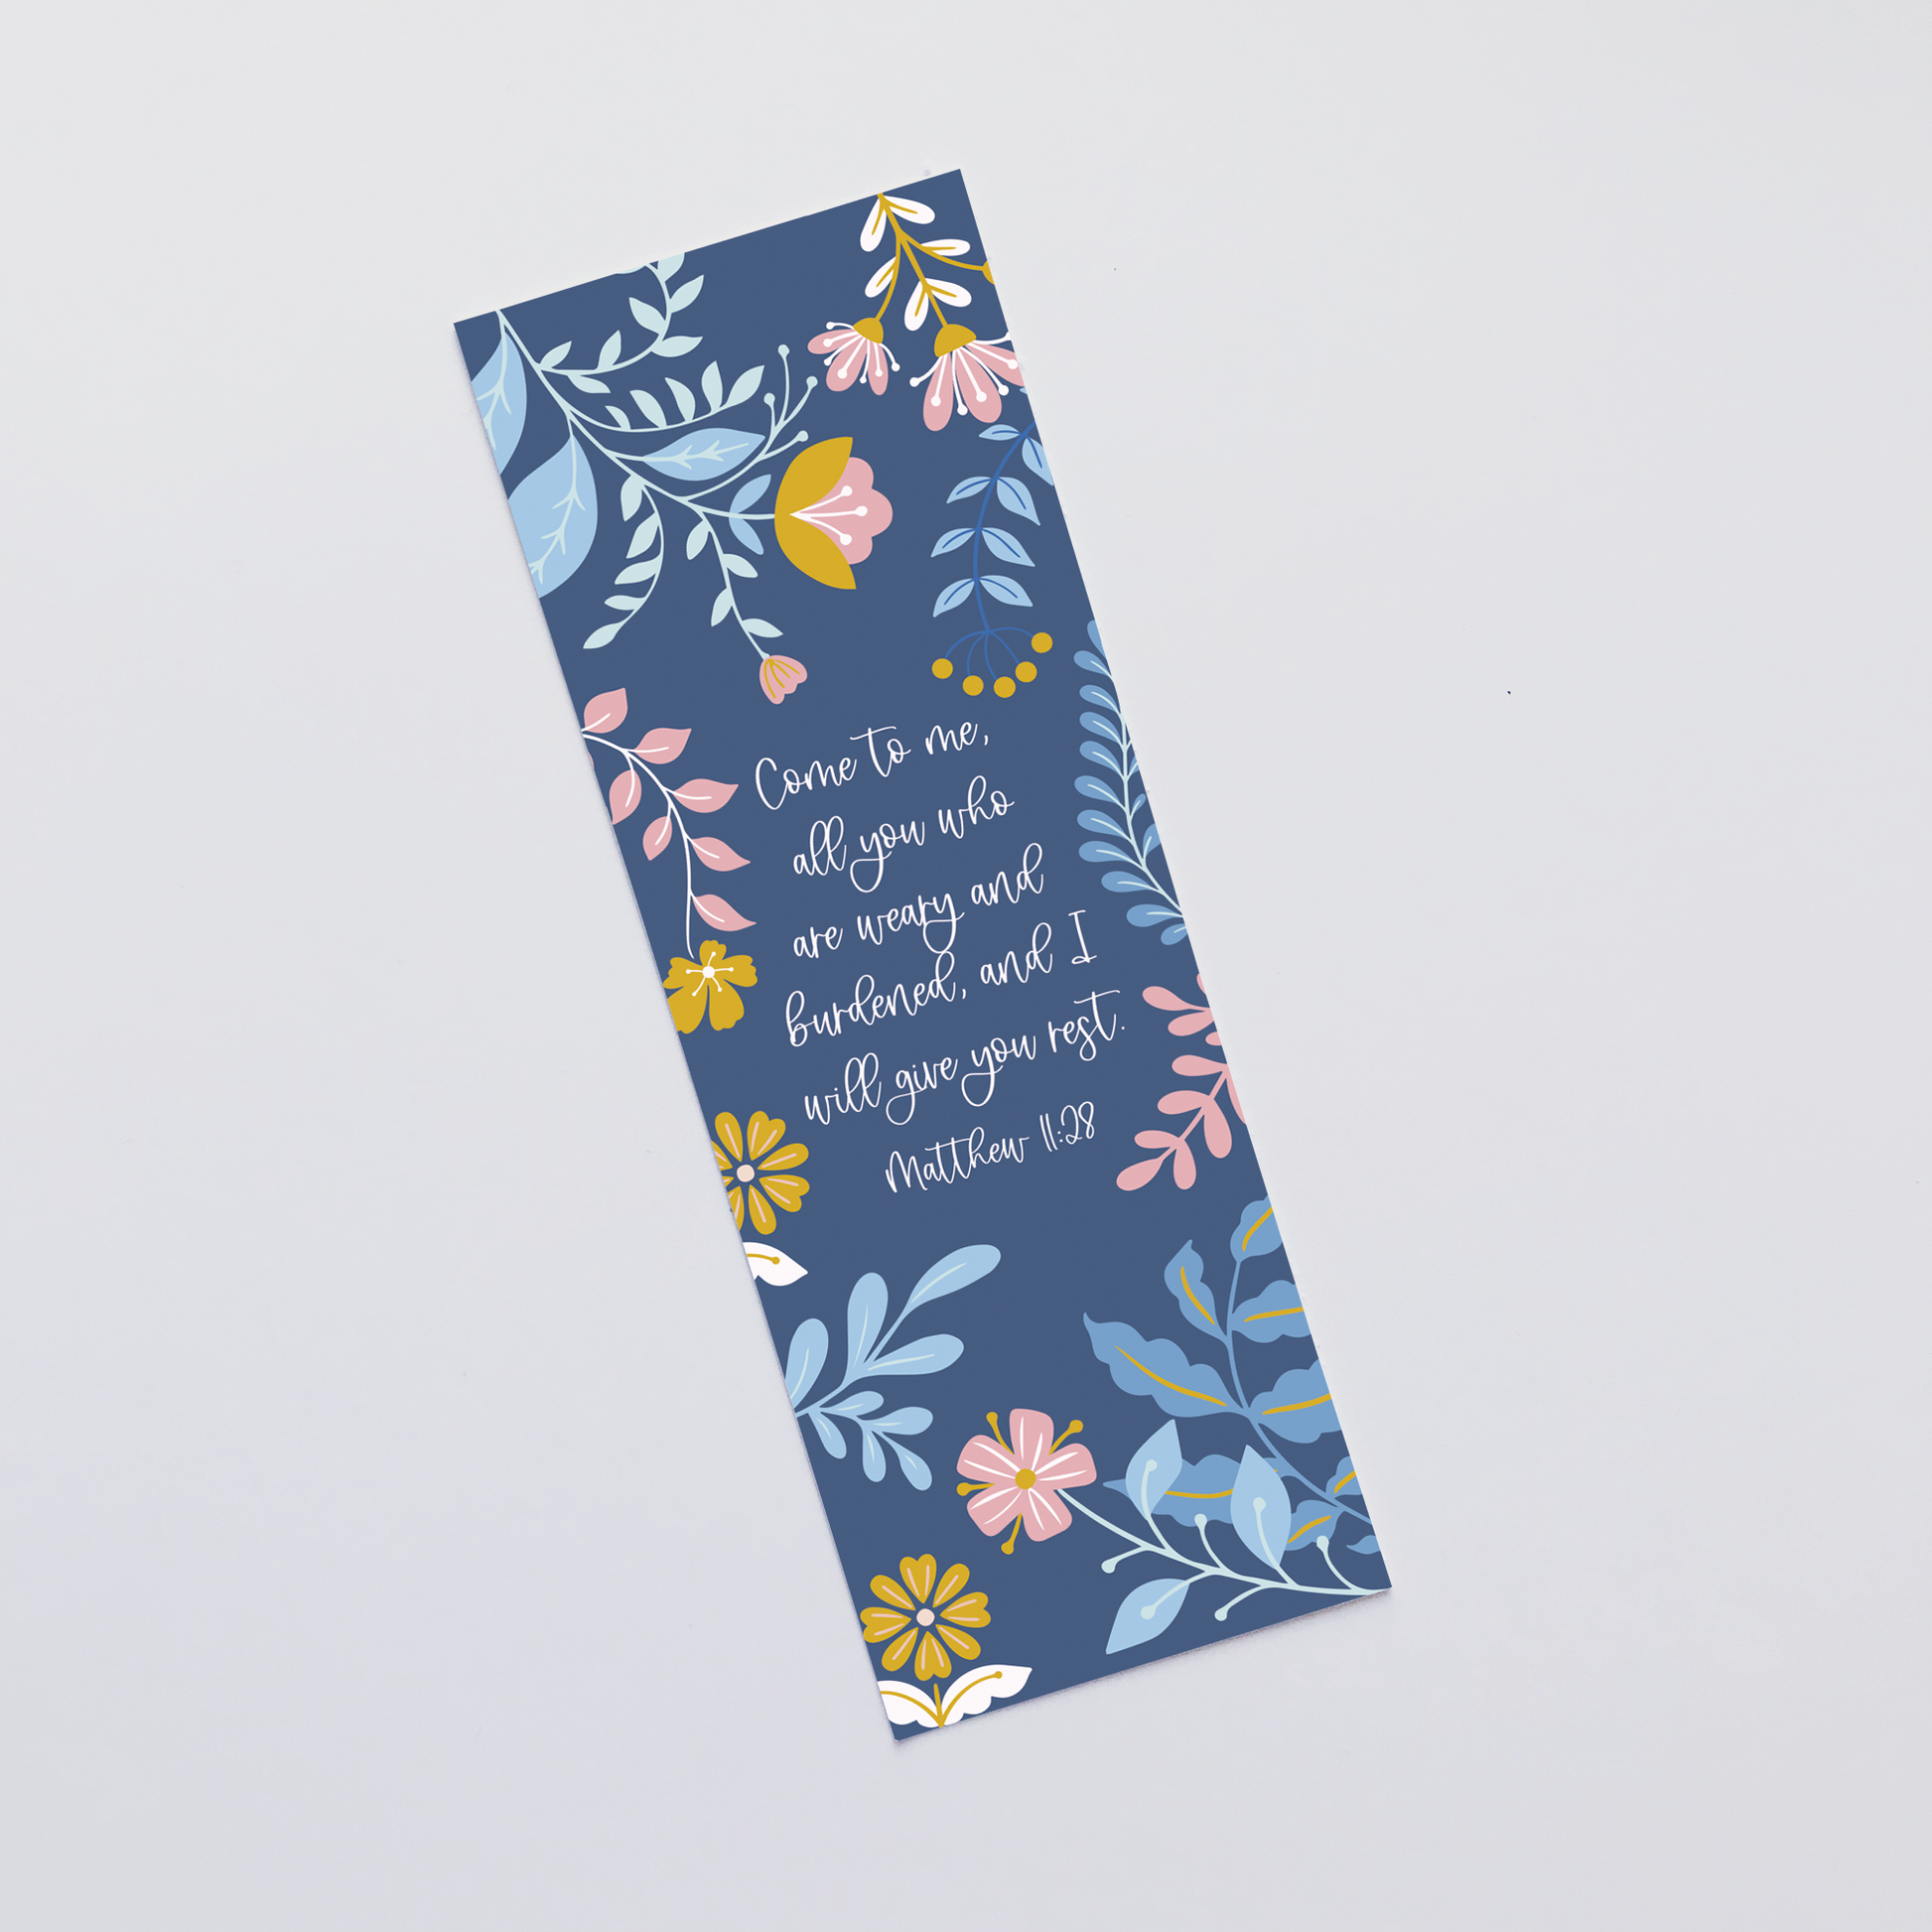 Christian Bookmark Gift - Come to Me Matthew 11:28 - The Wee Sparrow